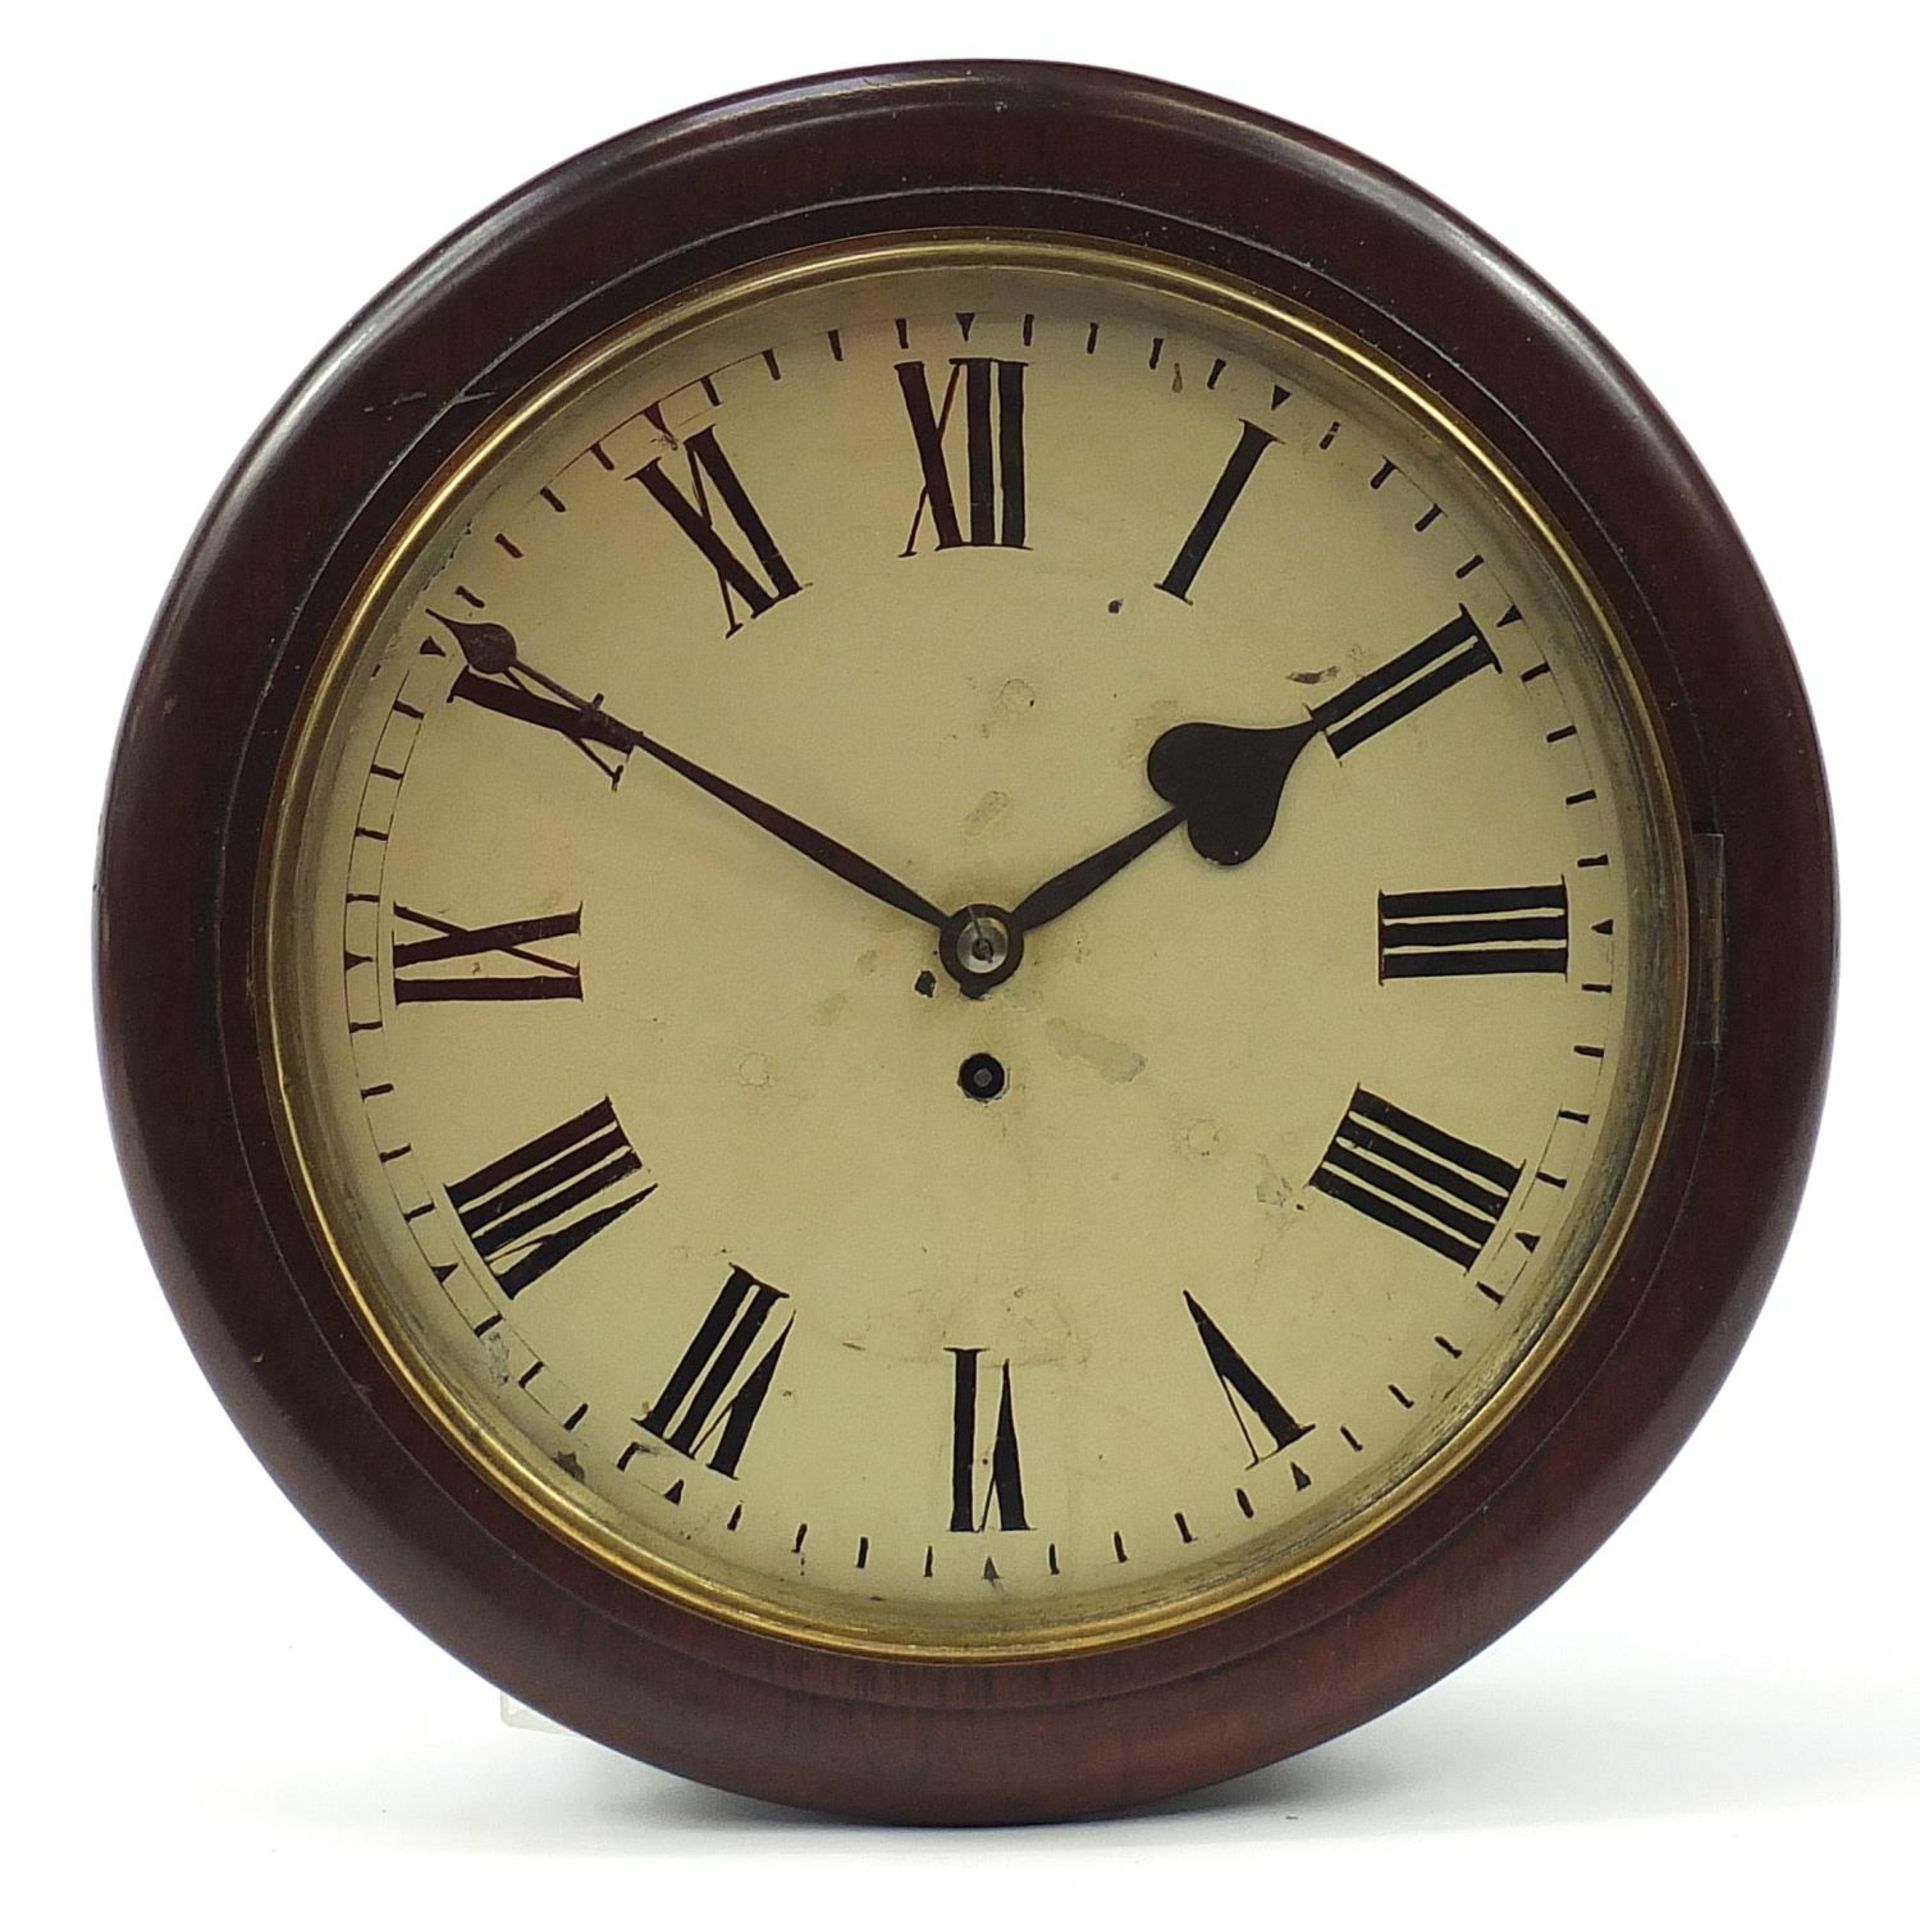 Victorian mahogany fusee wall clock with Roman numerals, 38.5cm in diameter The clock winds and is